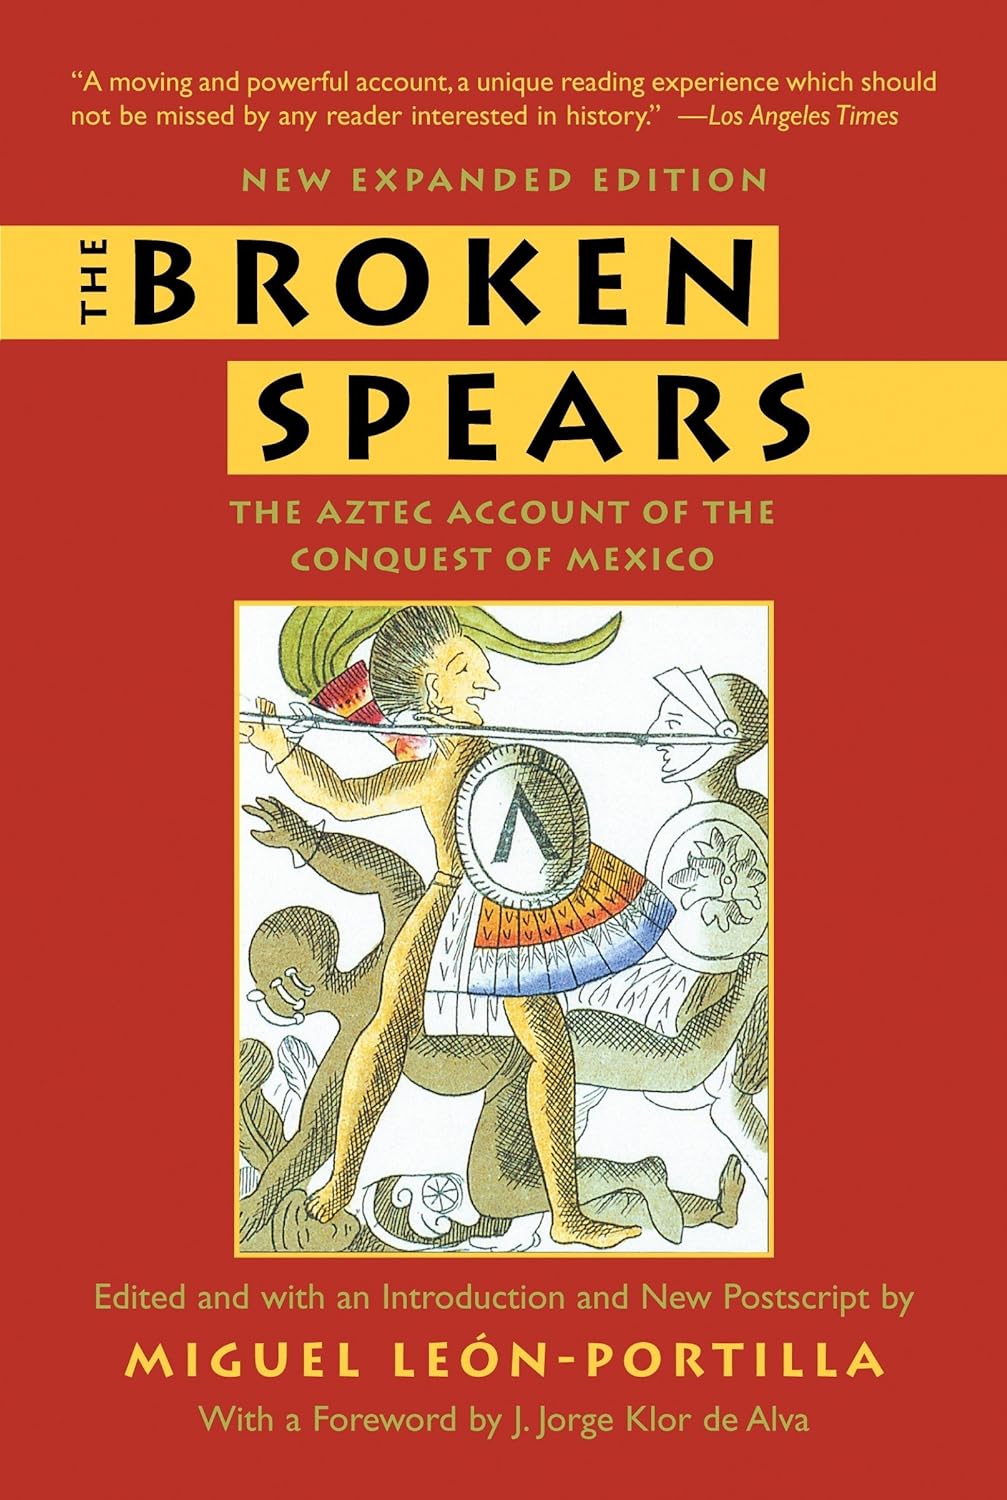 books about the aztecs10